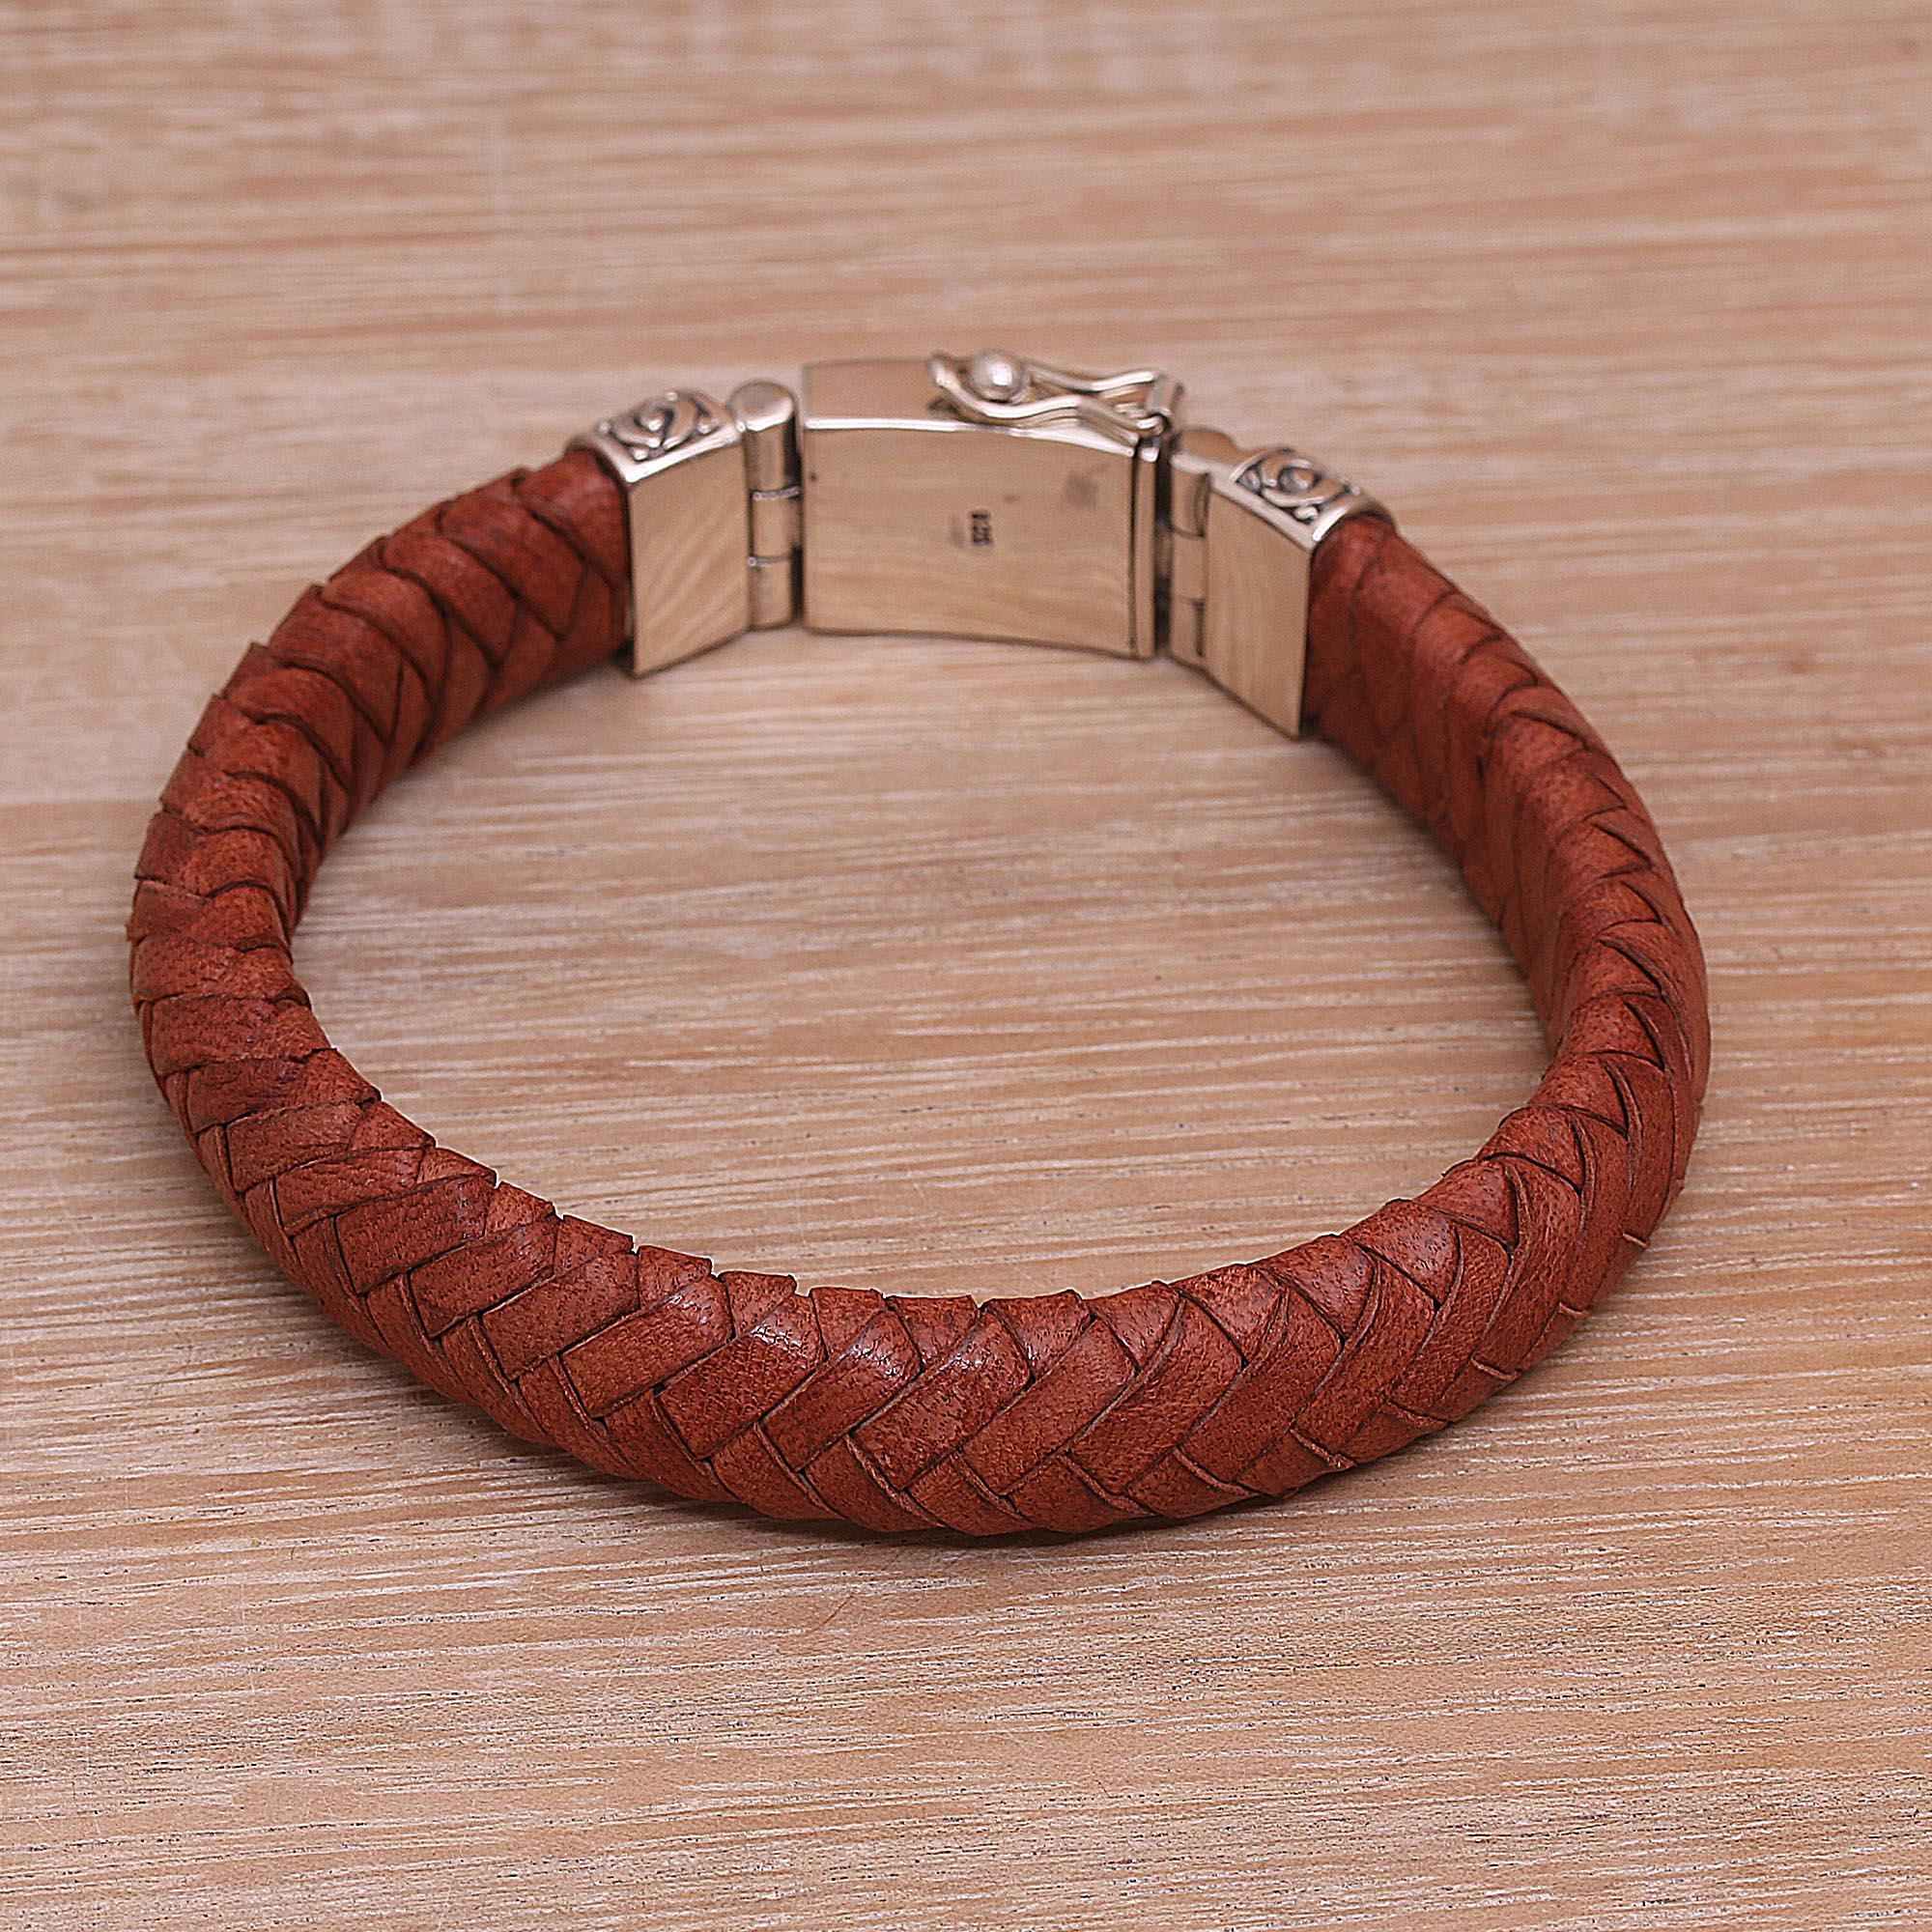 Balinese Sterling Silver and Leather Wristband Bracelet - Tranquil ...